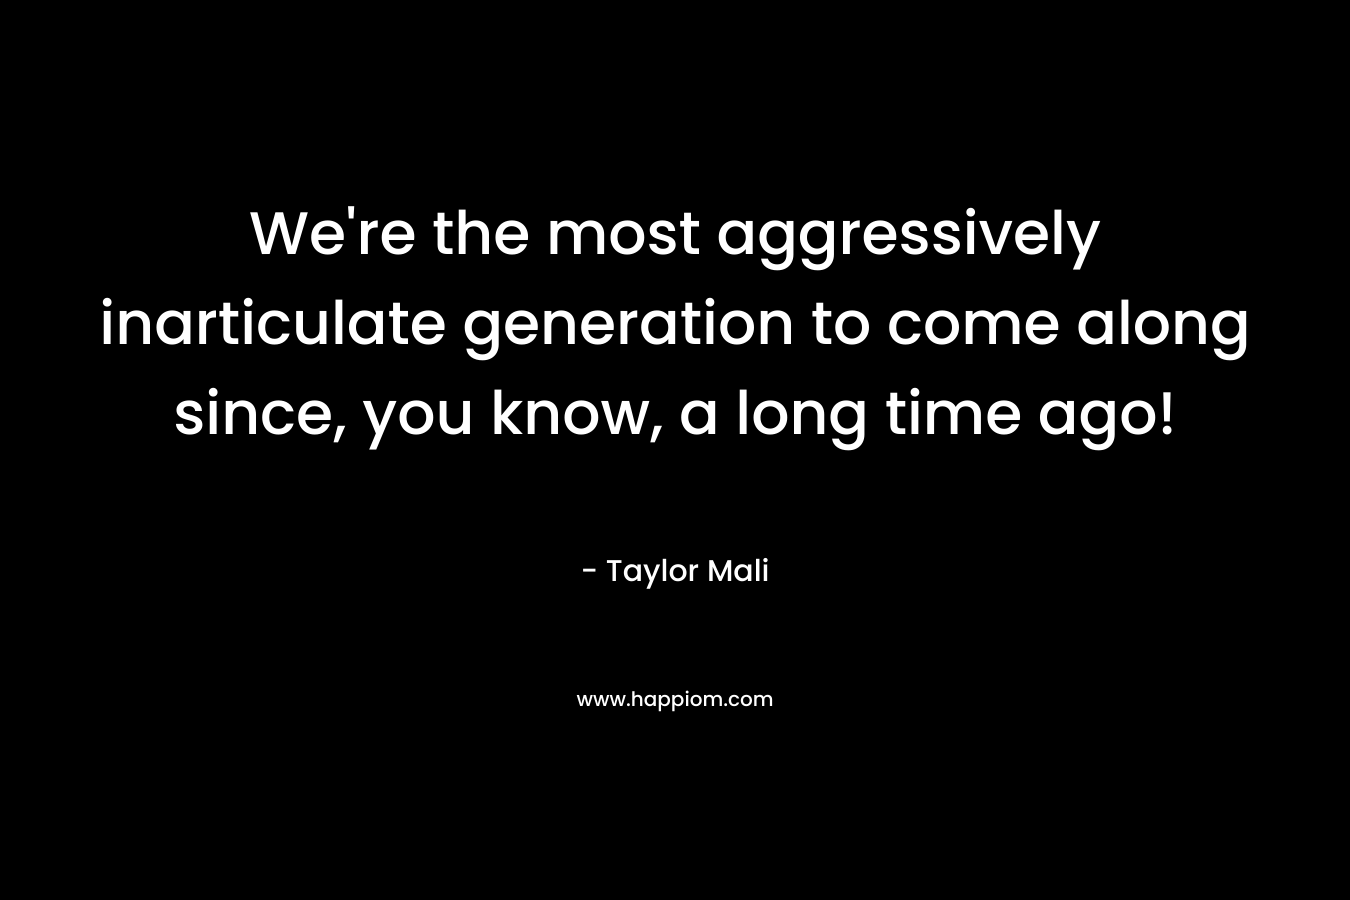 We’re the most aggressively inarticulate generation to come along since, you know, a long time ago! – Taylor Mali